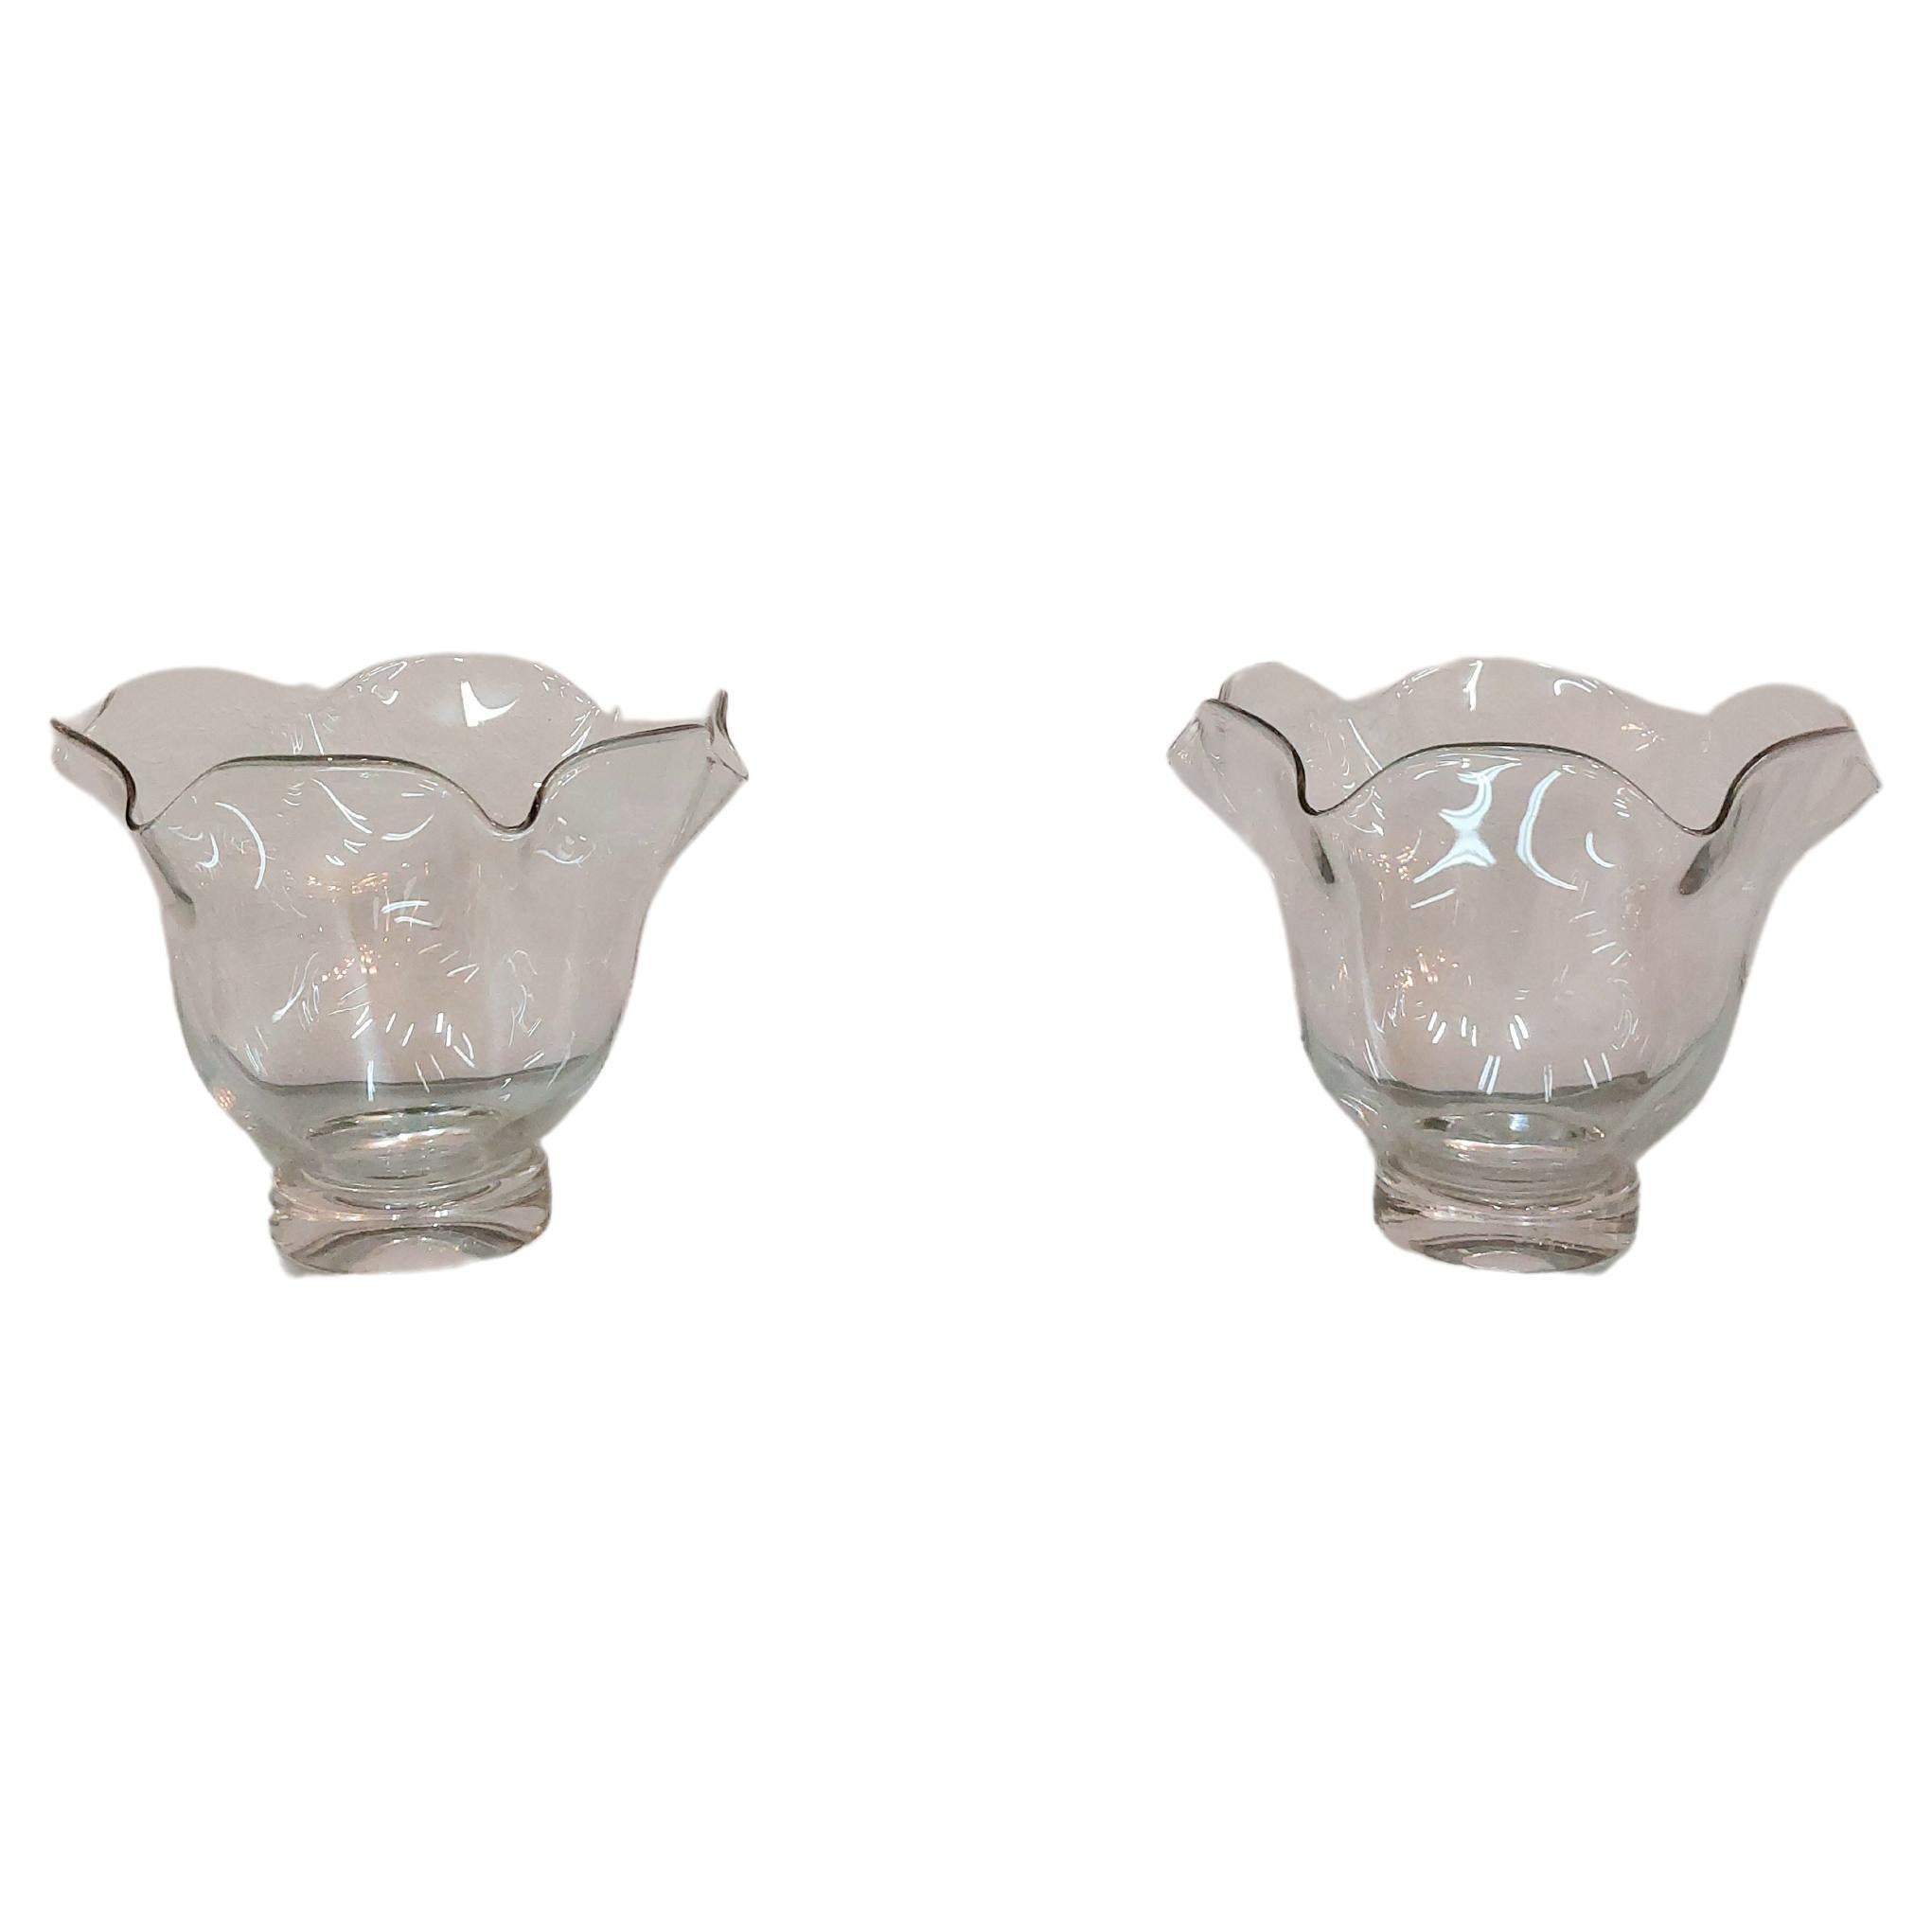 Set of 2 bowls / vases produced in Murano by the Maestri Muranesi company in the 1950s. The pair is in transparent mouth-blown Murano glass with a tulip-shaped body and wavy edges. Illegible signature.



Note: We try to offer our customers an